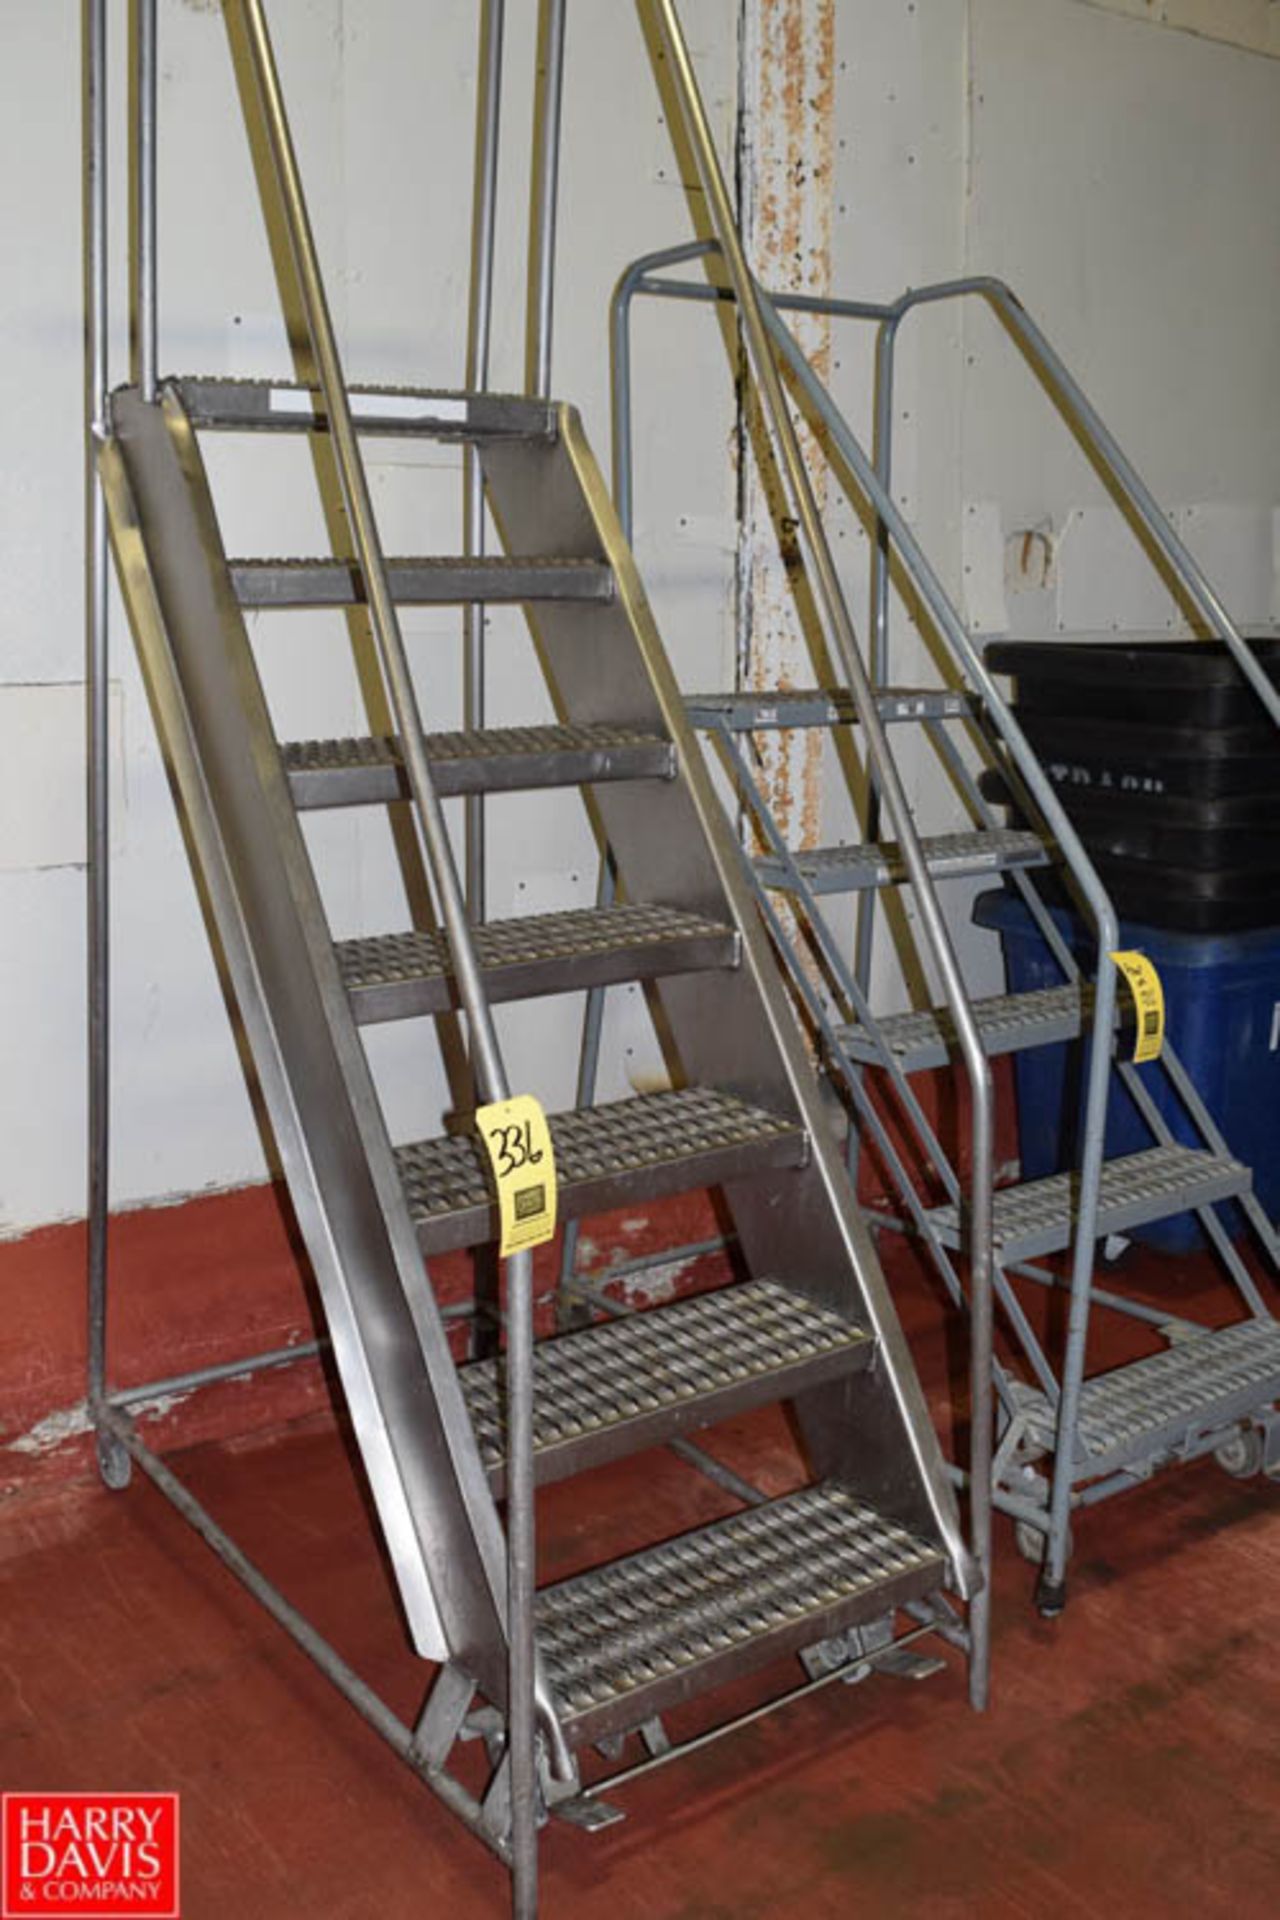 S/S Portable Stairs - Rigging Fee: $ Please Contact Rigger for Pricing